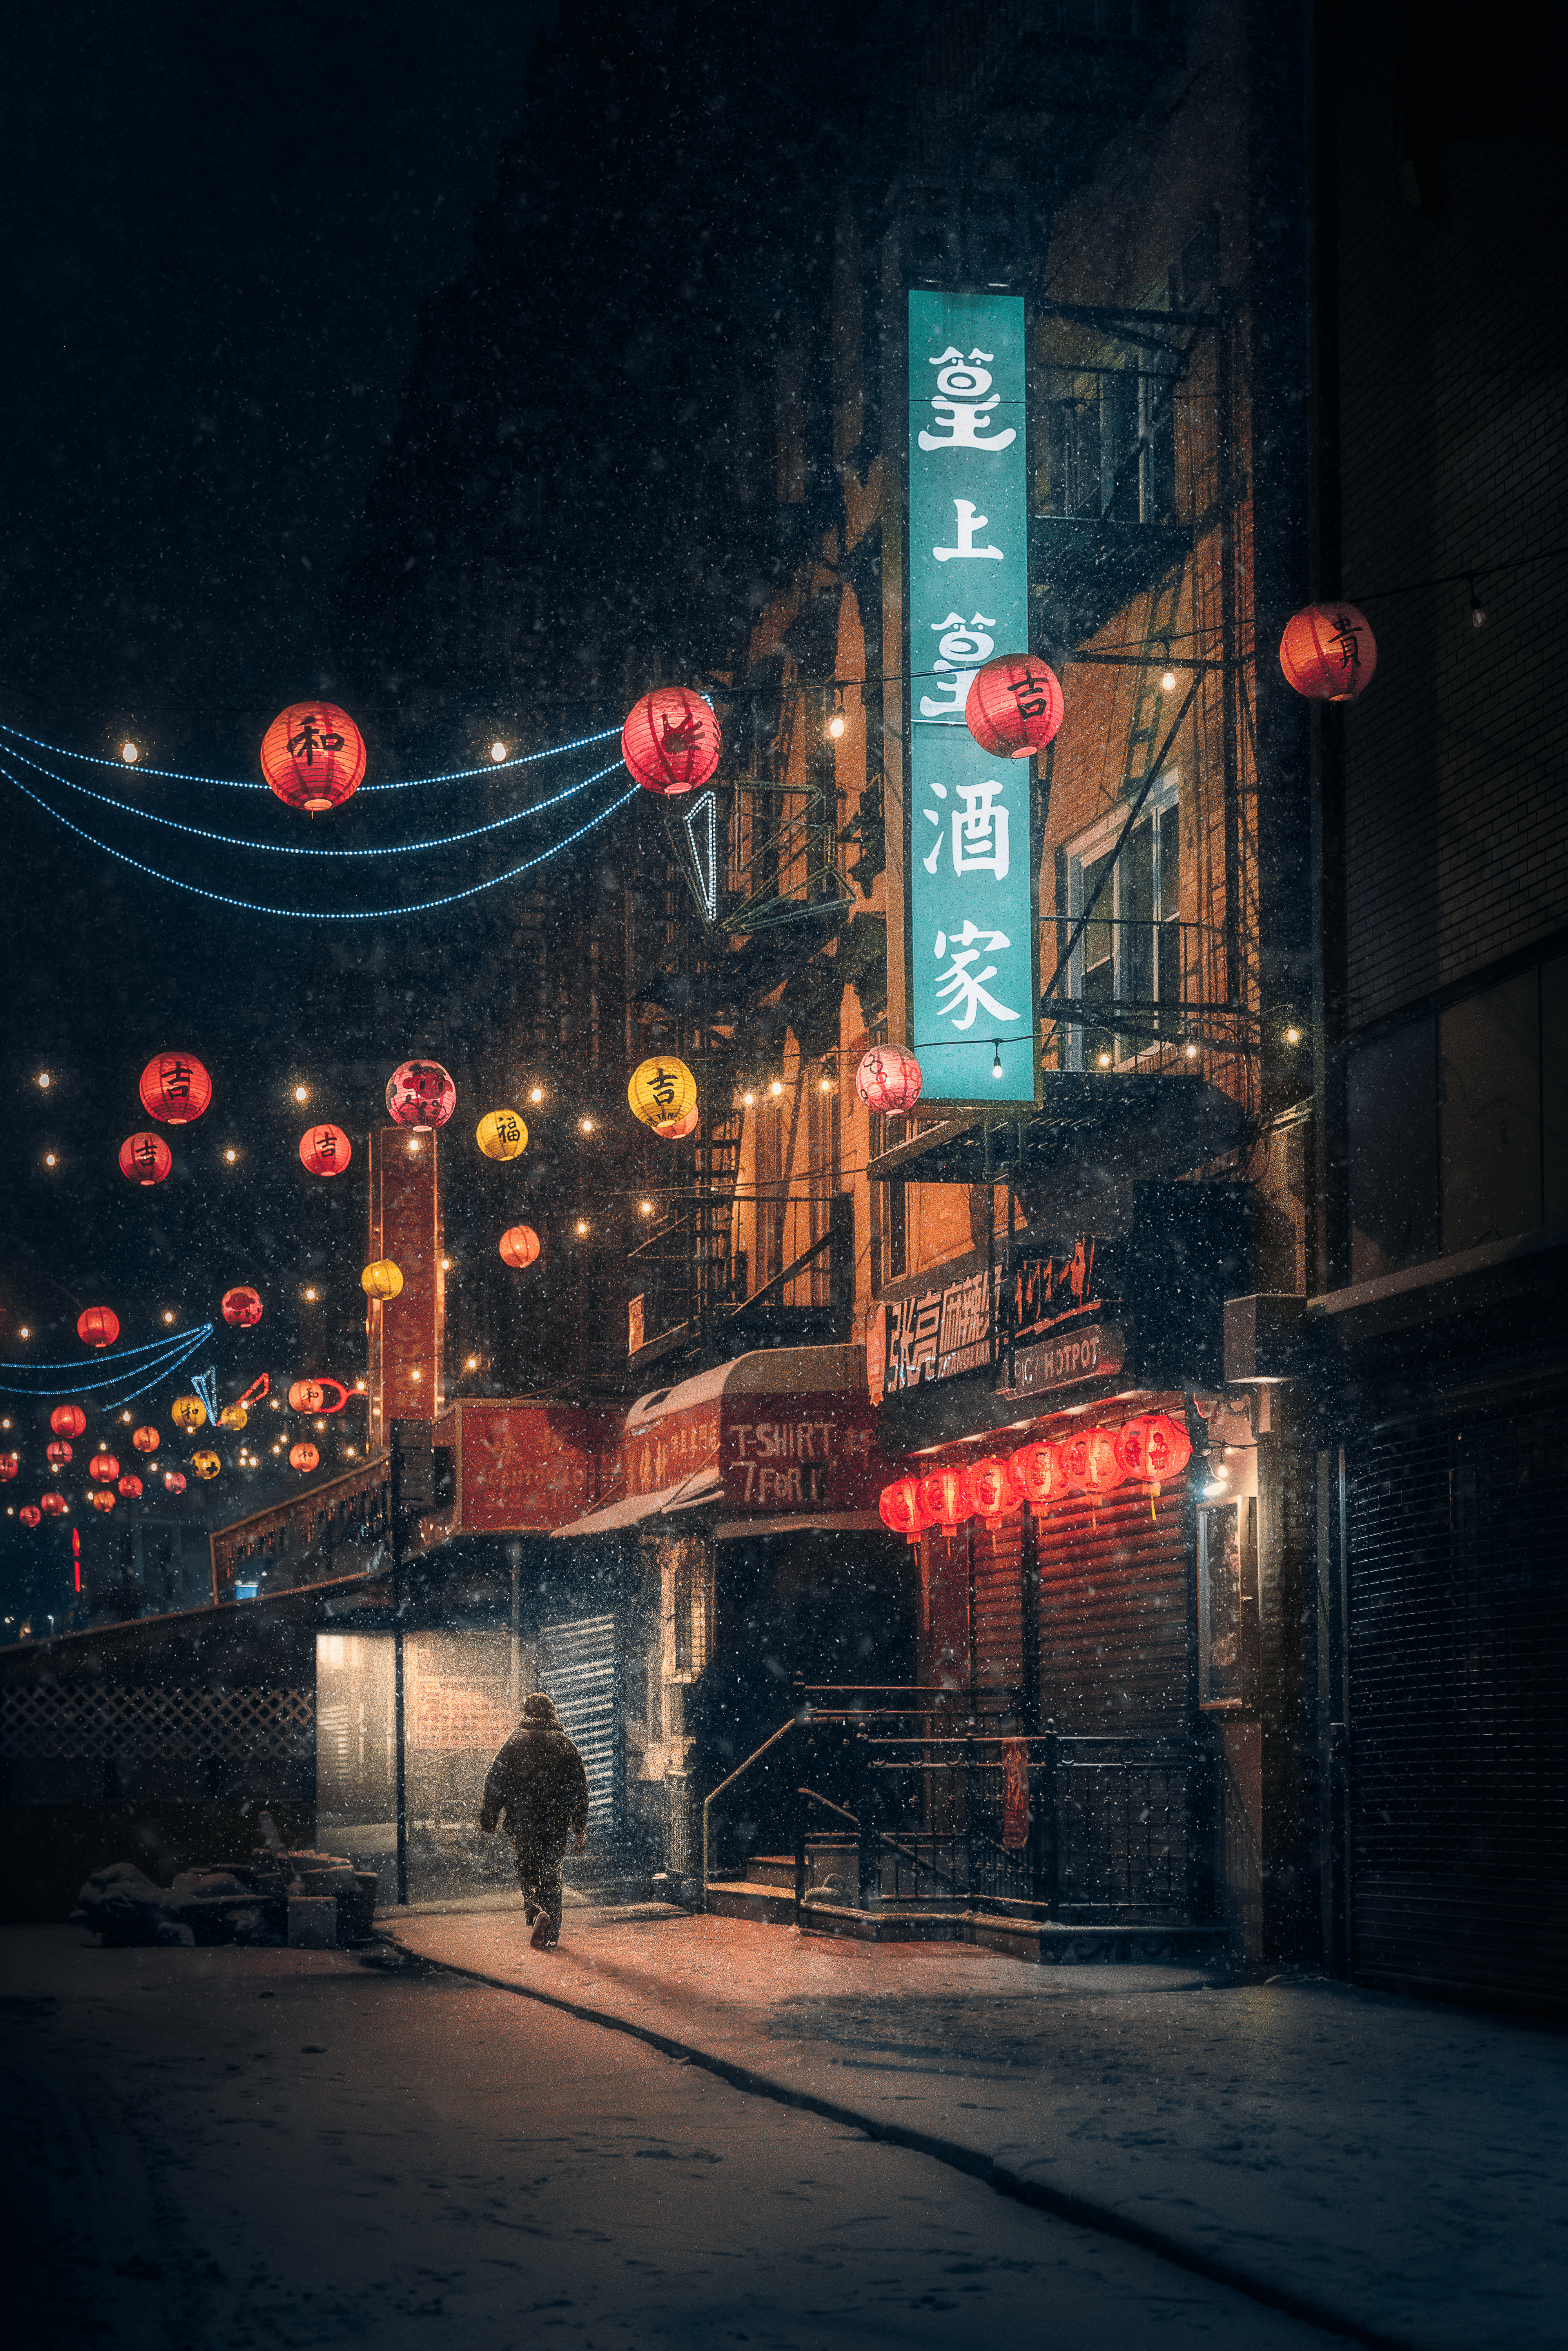 A Wintry Night in Chinatown by Mindzeye